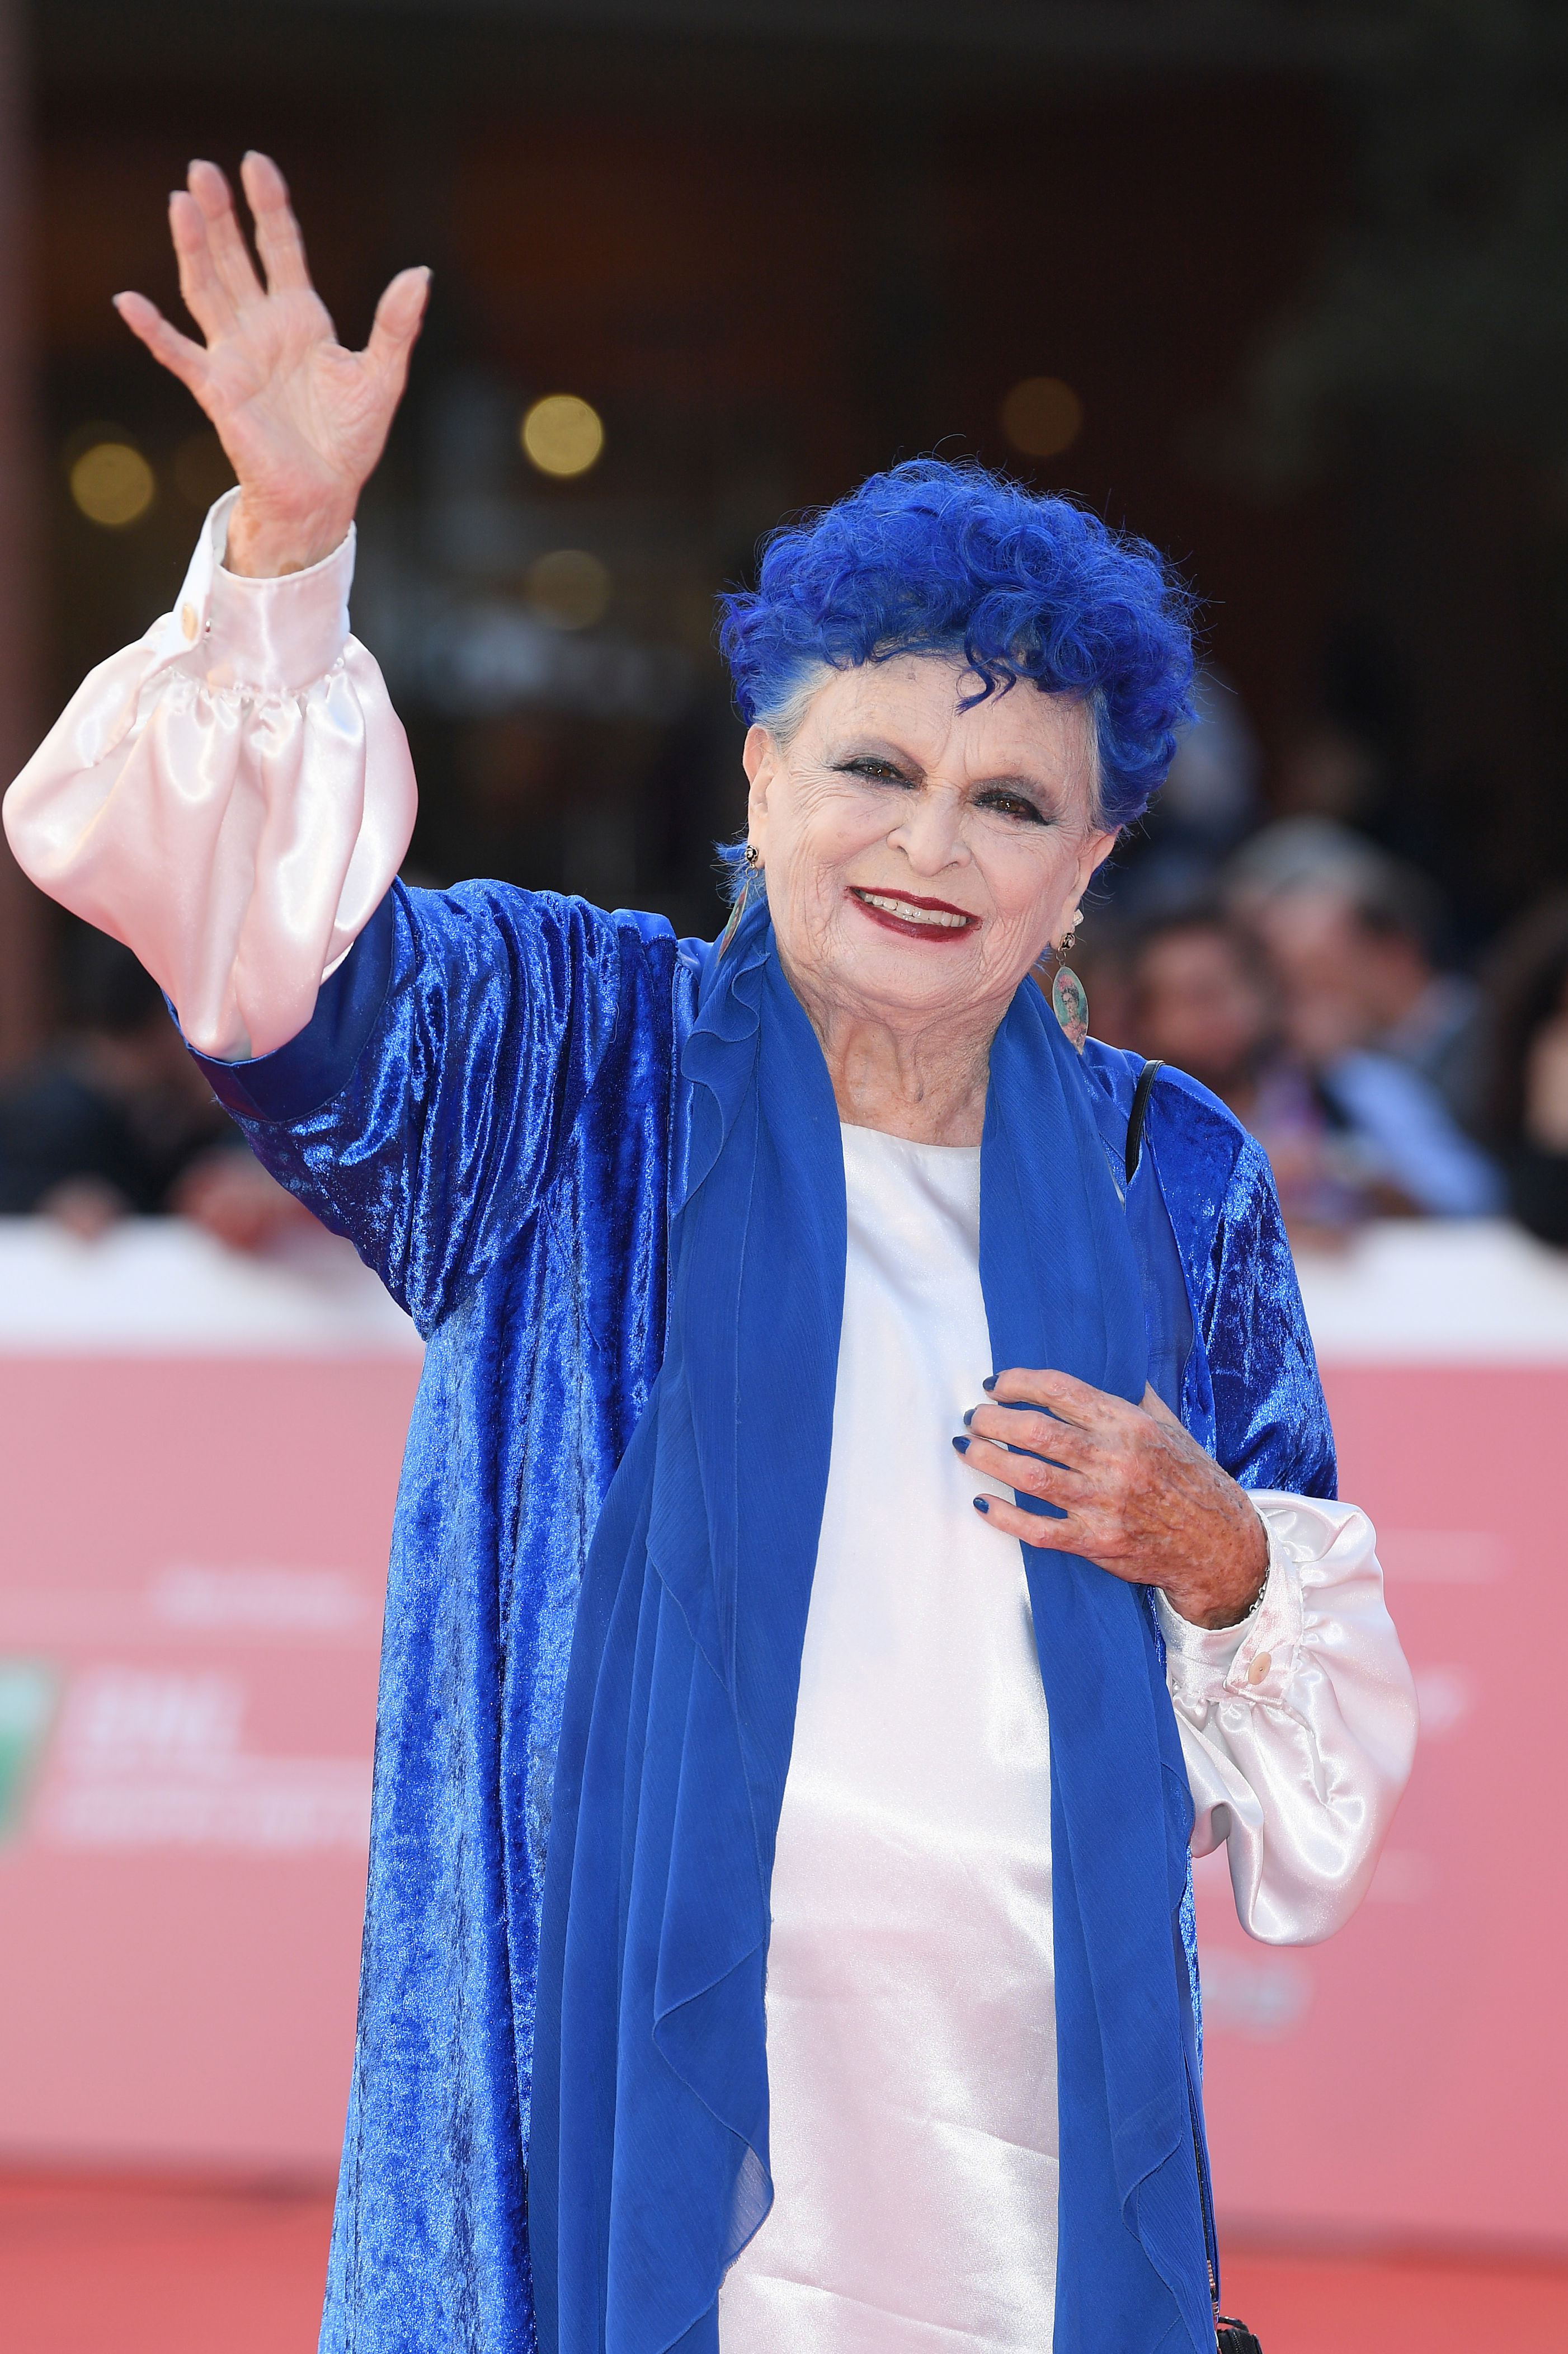 <p>Italian actress Lucia Bosè died on March 23 from coronavirus-related complications. She was 89. She reached the peak of her fame in the 1950s during the time of Italian Neorealism. Her filmography includes "Three Girls from Rome," "Concert of Intrigue," "Nocturne 29" and "The Picasso Summer."</p>